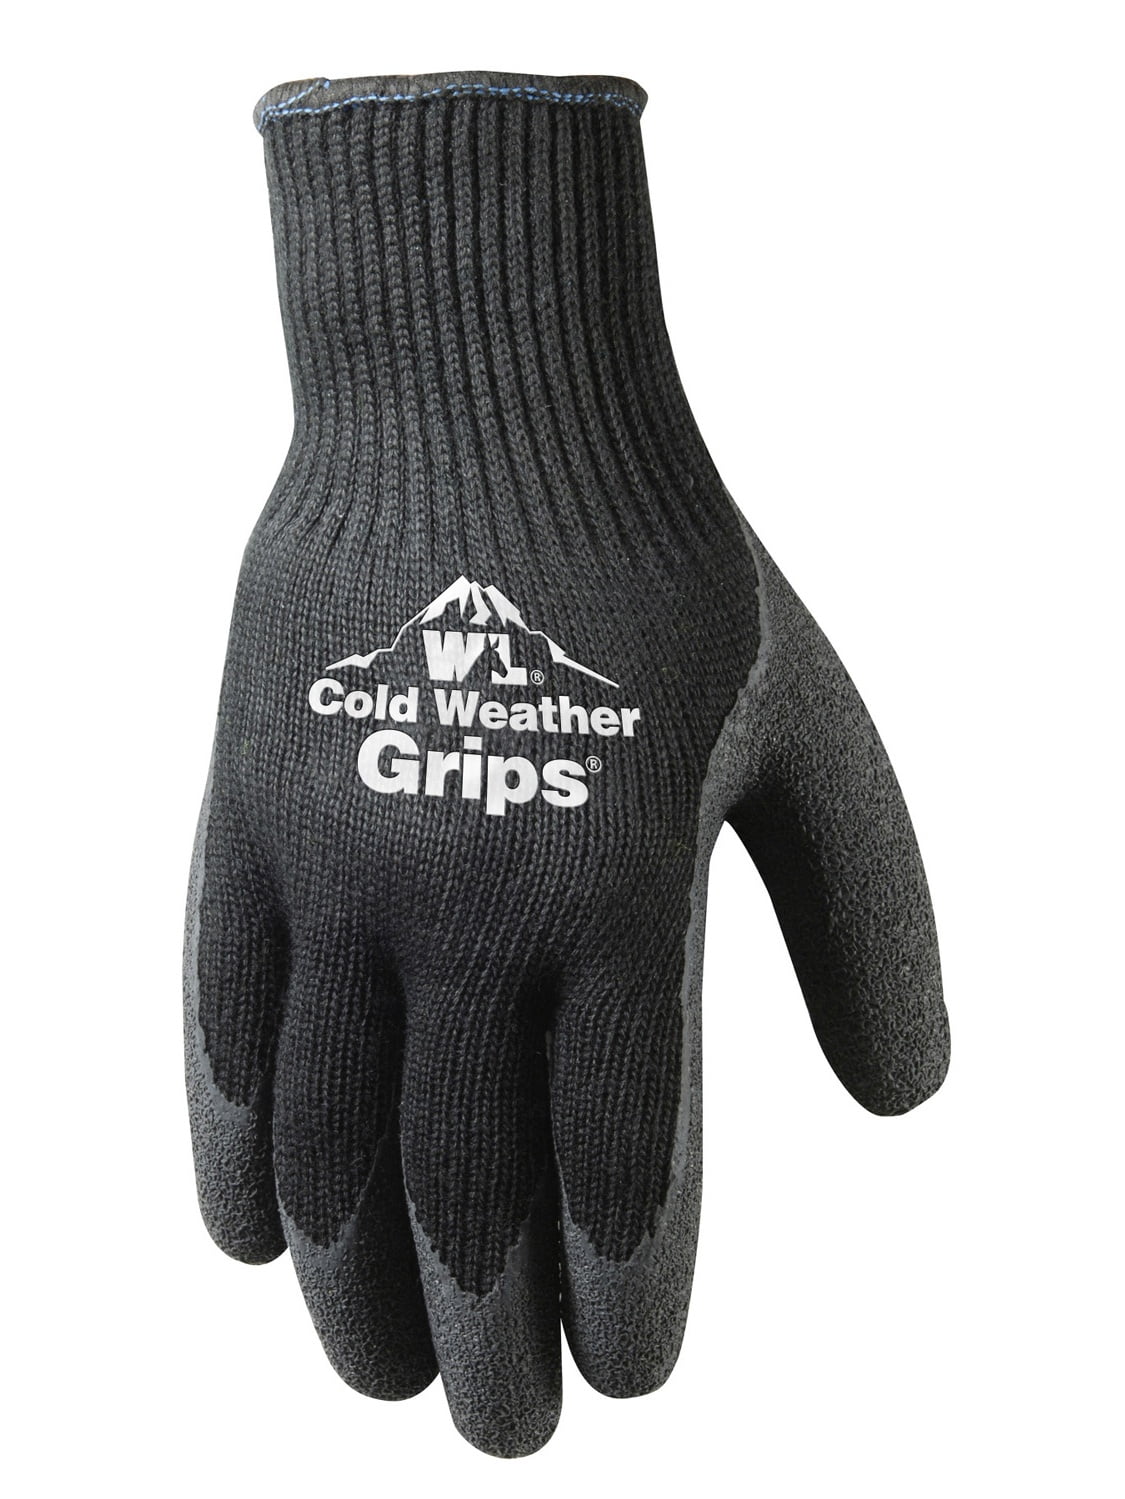 Cold Weather Grip Gloves